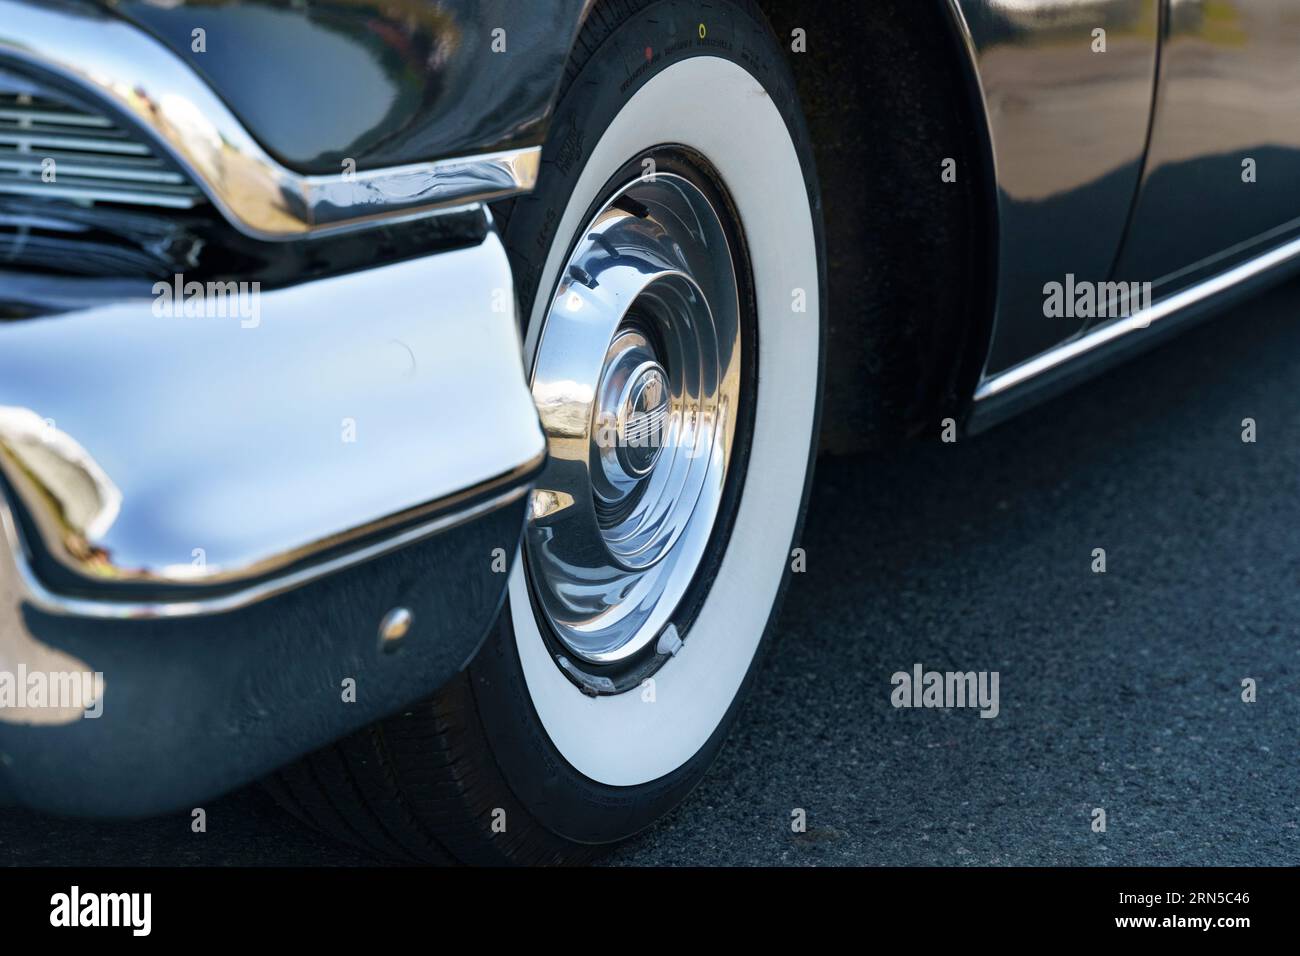 Waltershausen, Germany - June 10, 2023: A vintage American Oldsmobile Rocket Super 88 is parked in front of a Burgenland classic. View of the wheel an Stock Photo